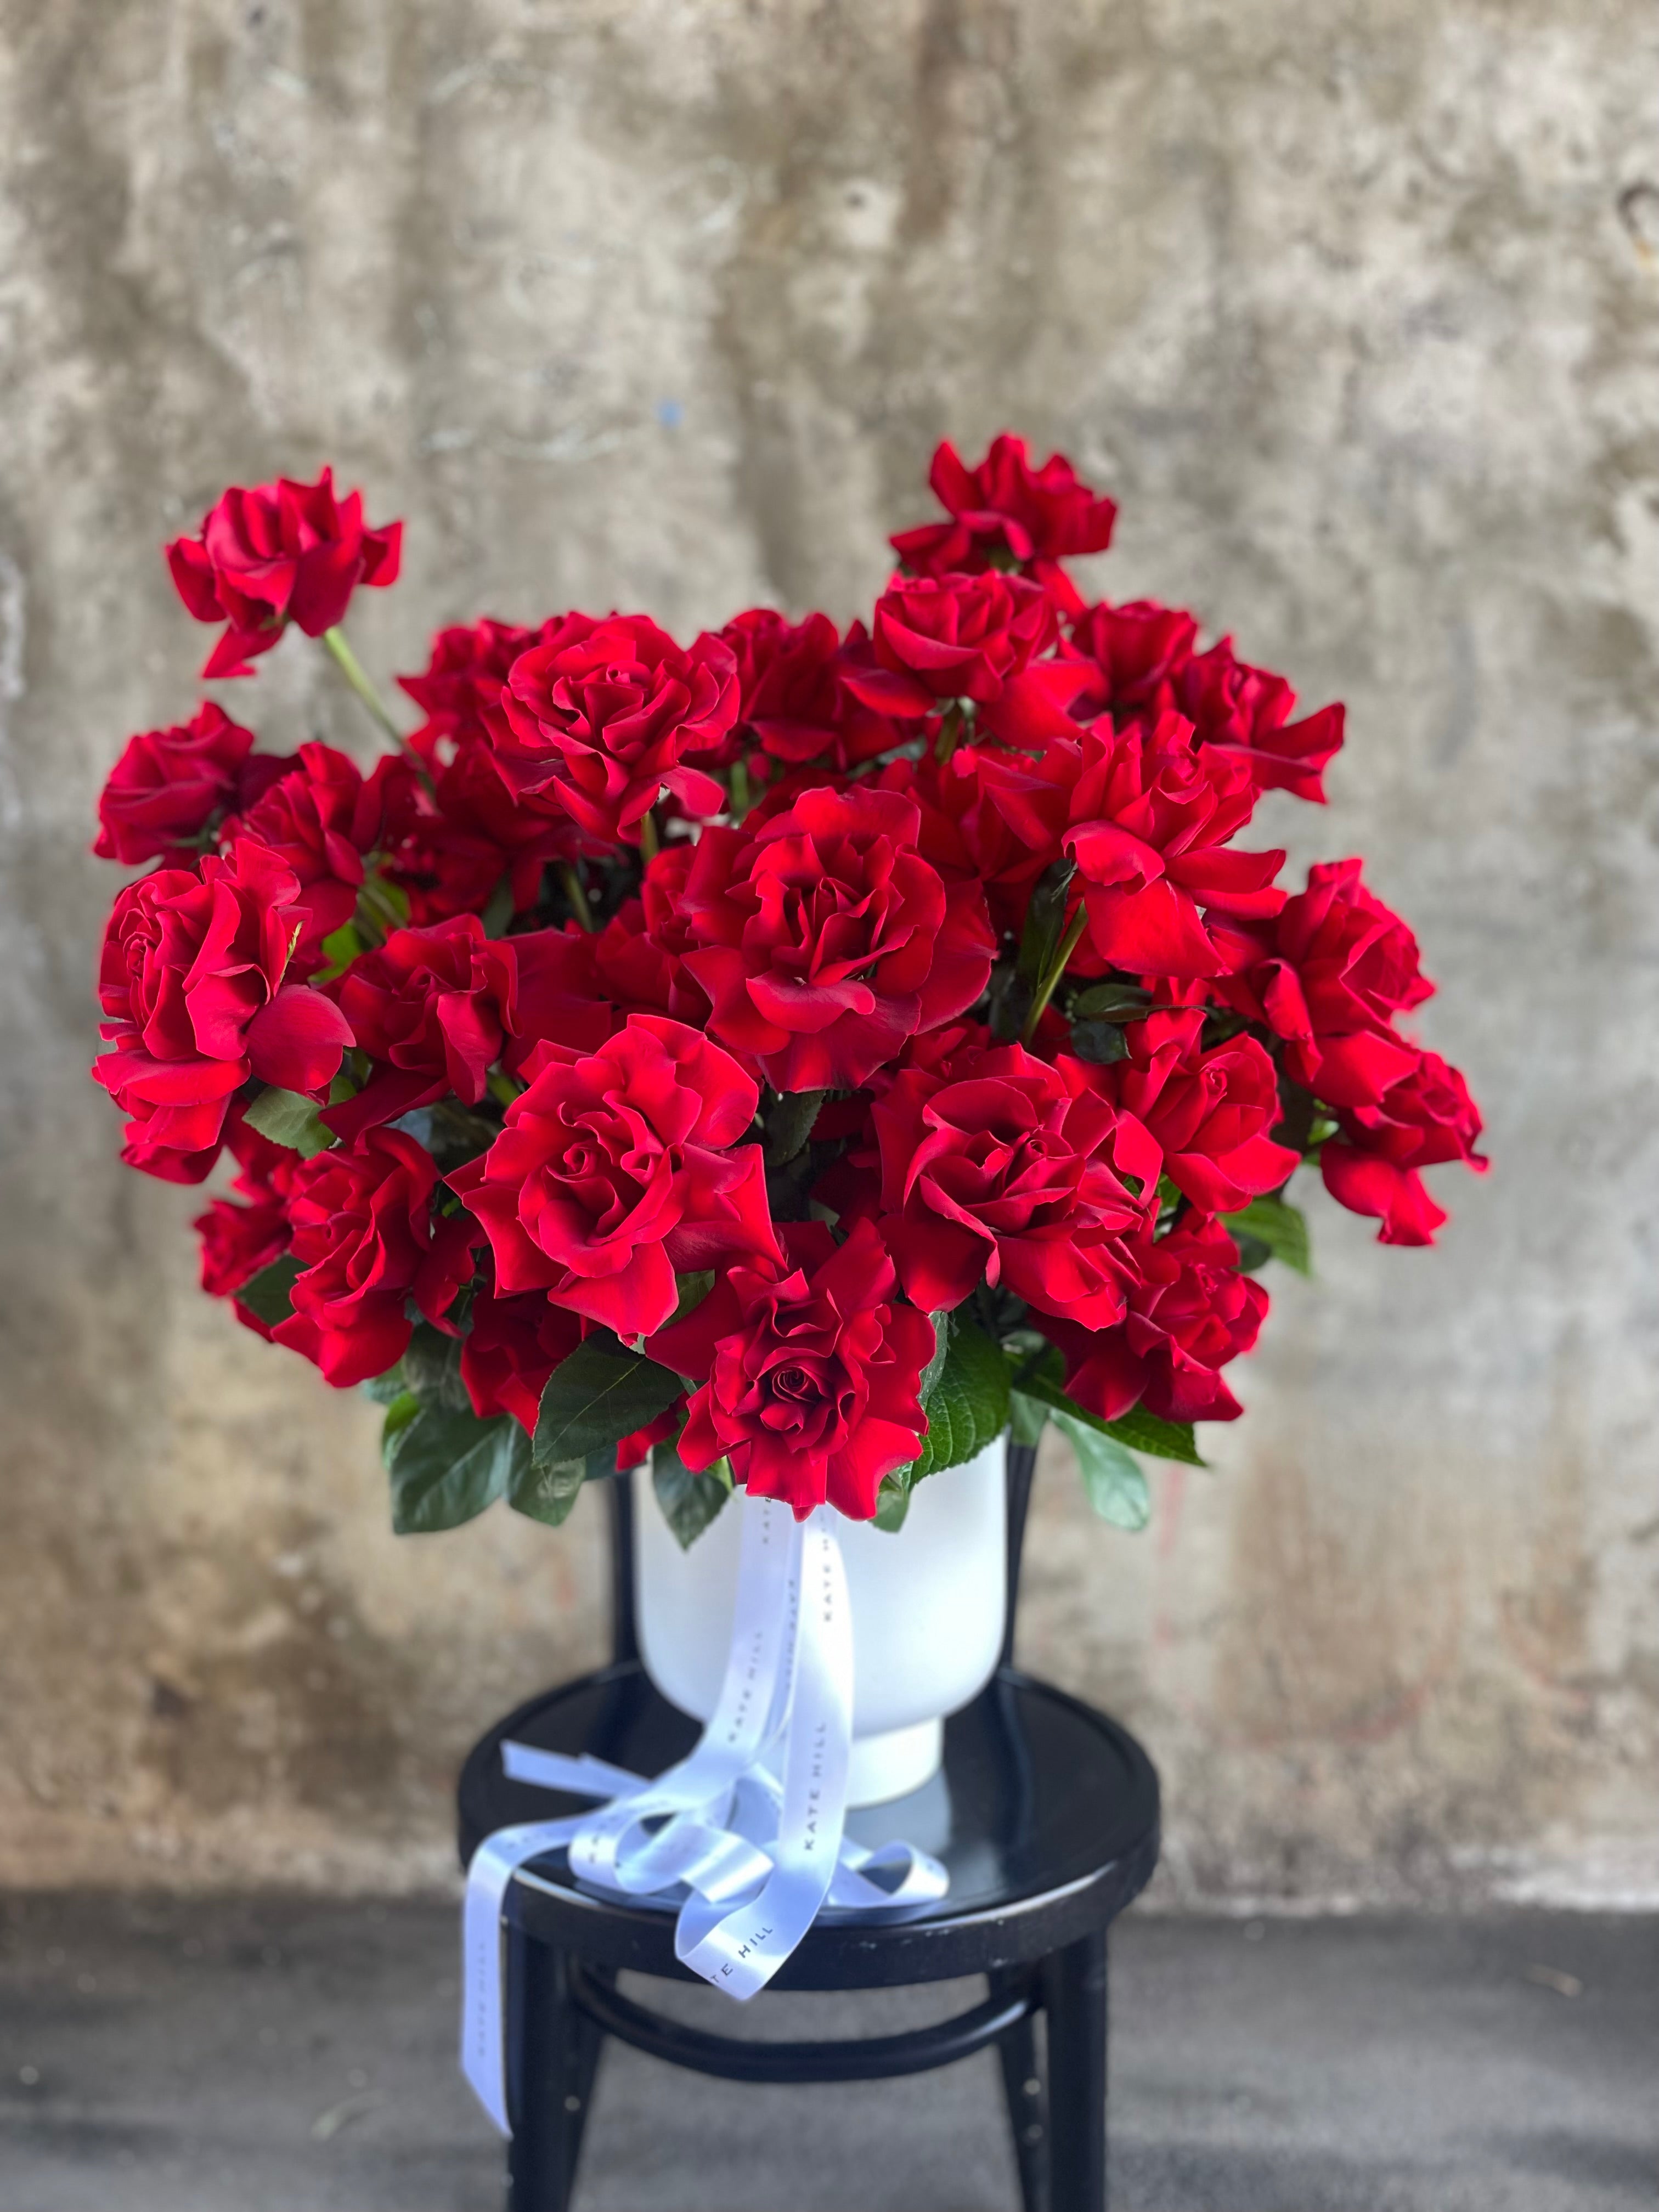 A grande design, displaying 50 long stemmed red roses on mass in a large white footed ceramic vase. Large design is sitting on a black bentwood chair with concrete wall in background.